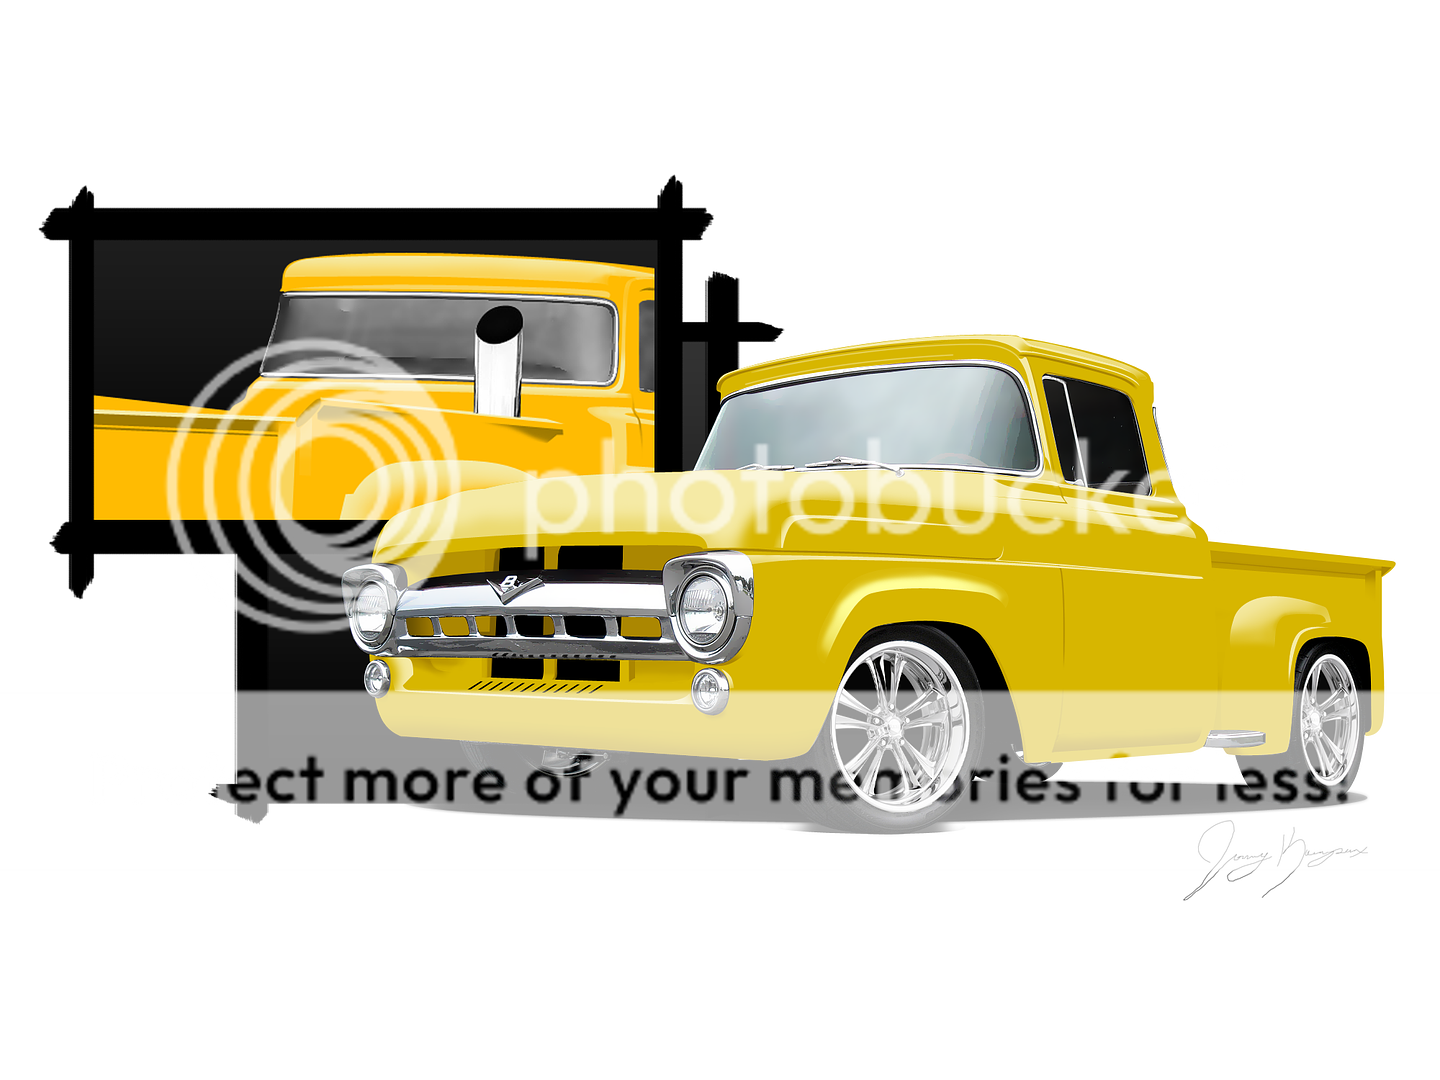 57Ford_zps2d2bc25e.png